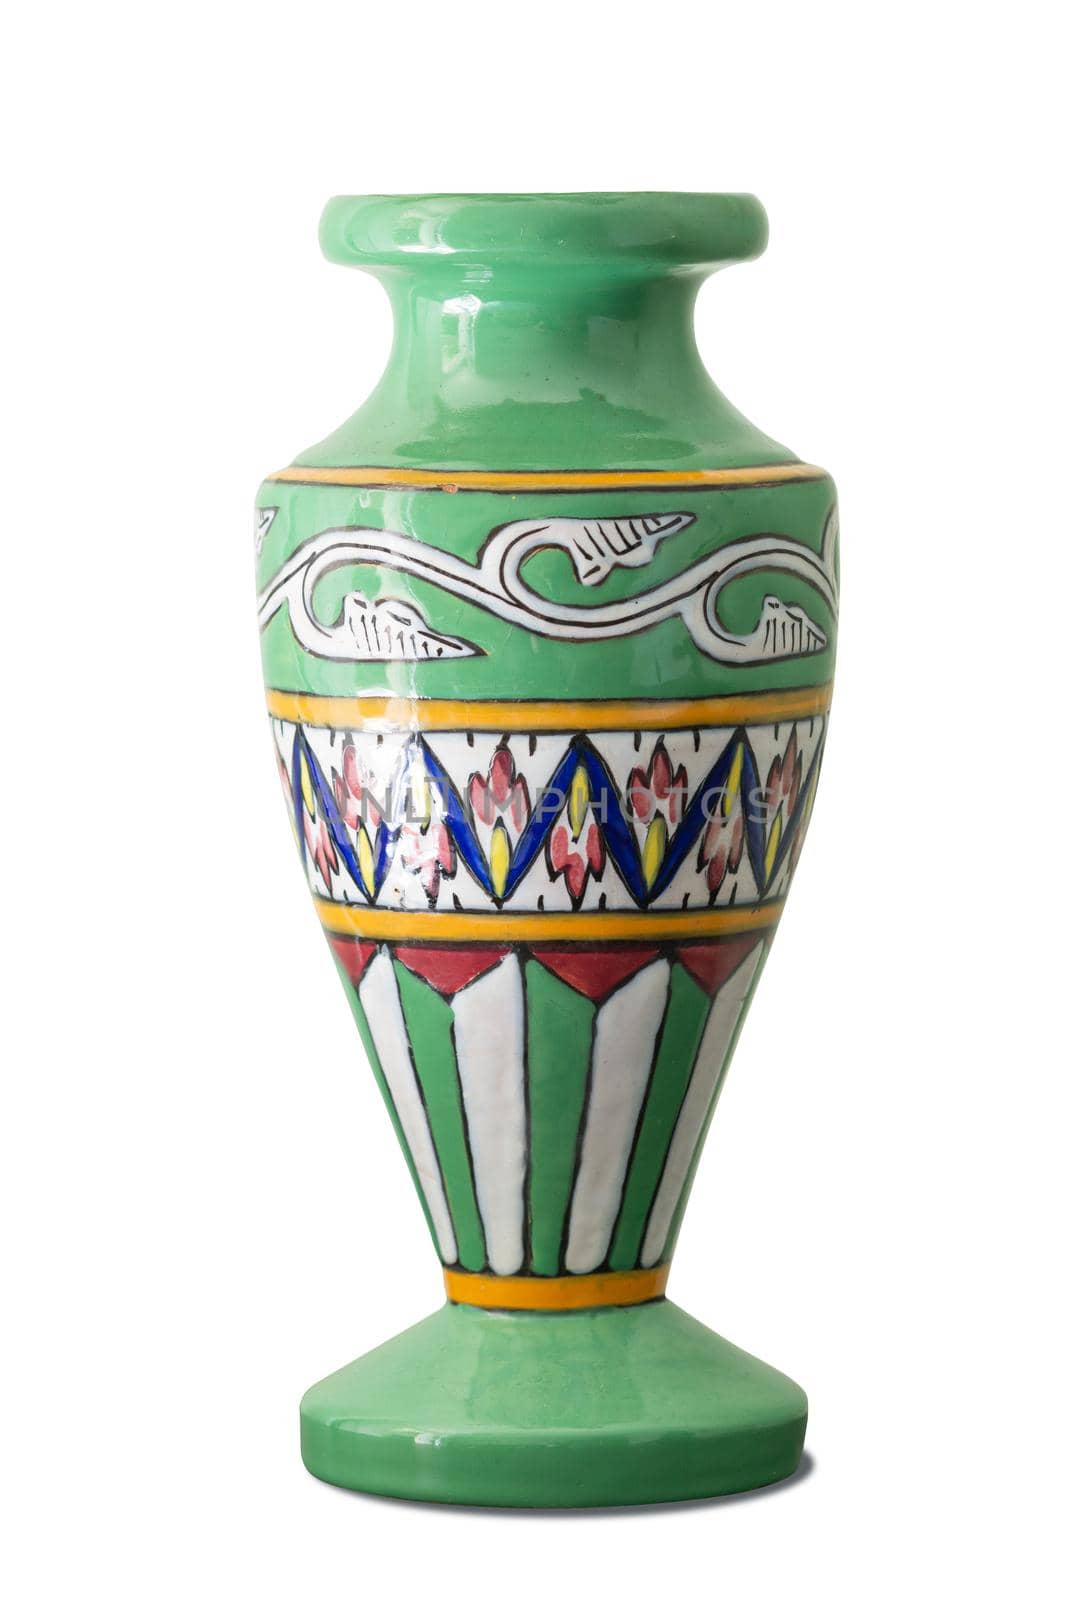 Green vase with colored decoration by MaxalTamor